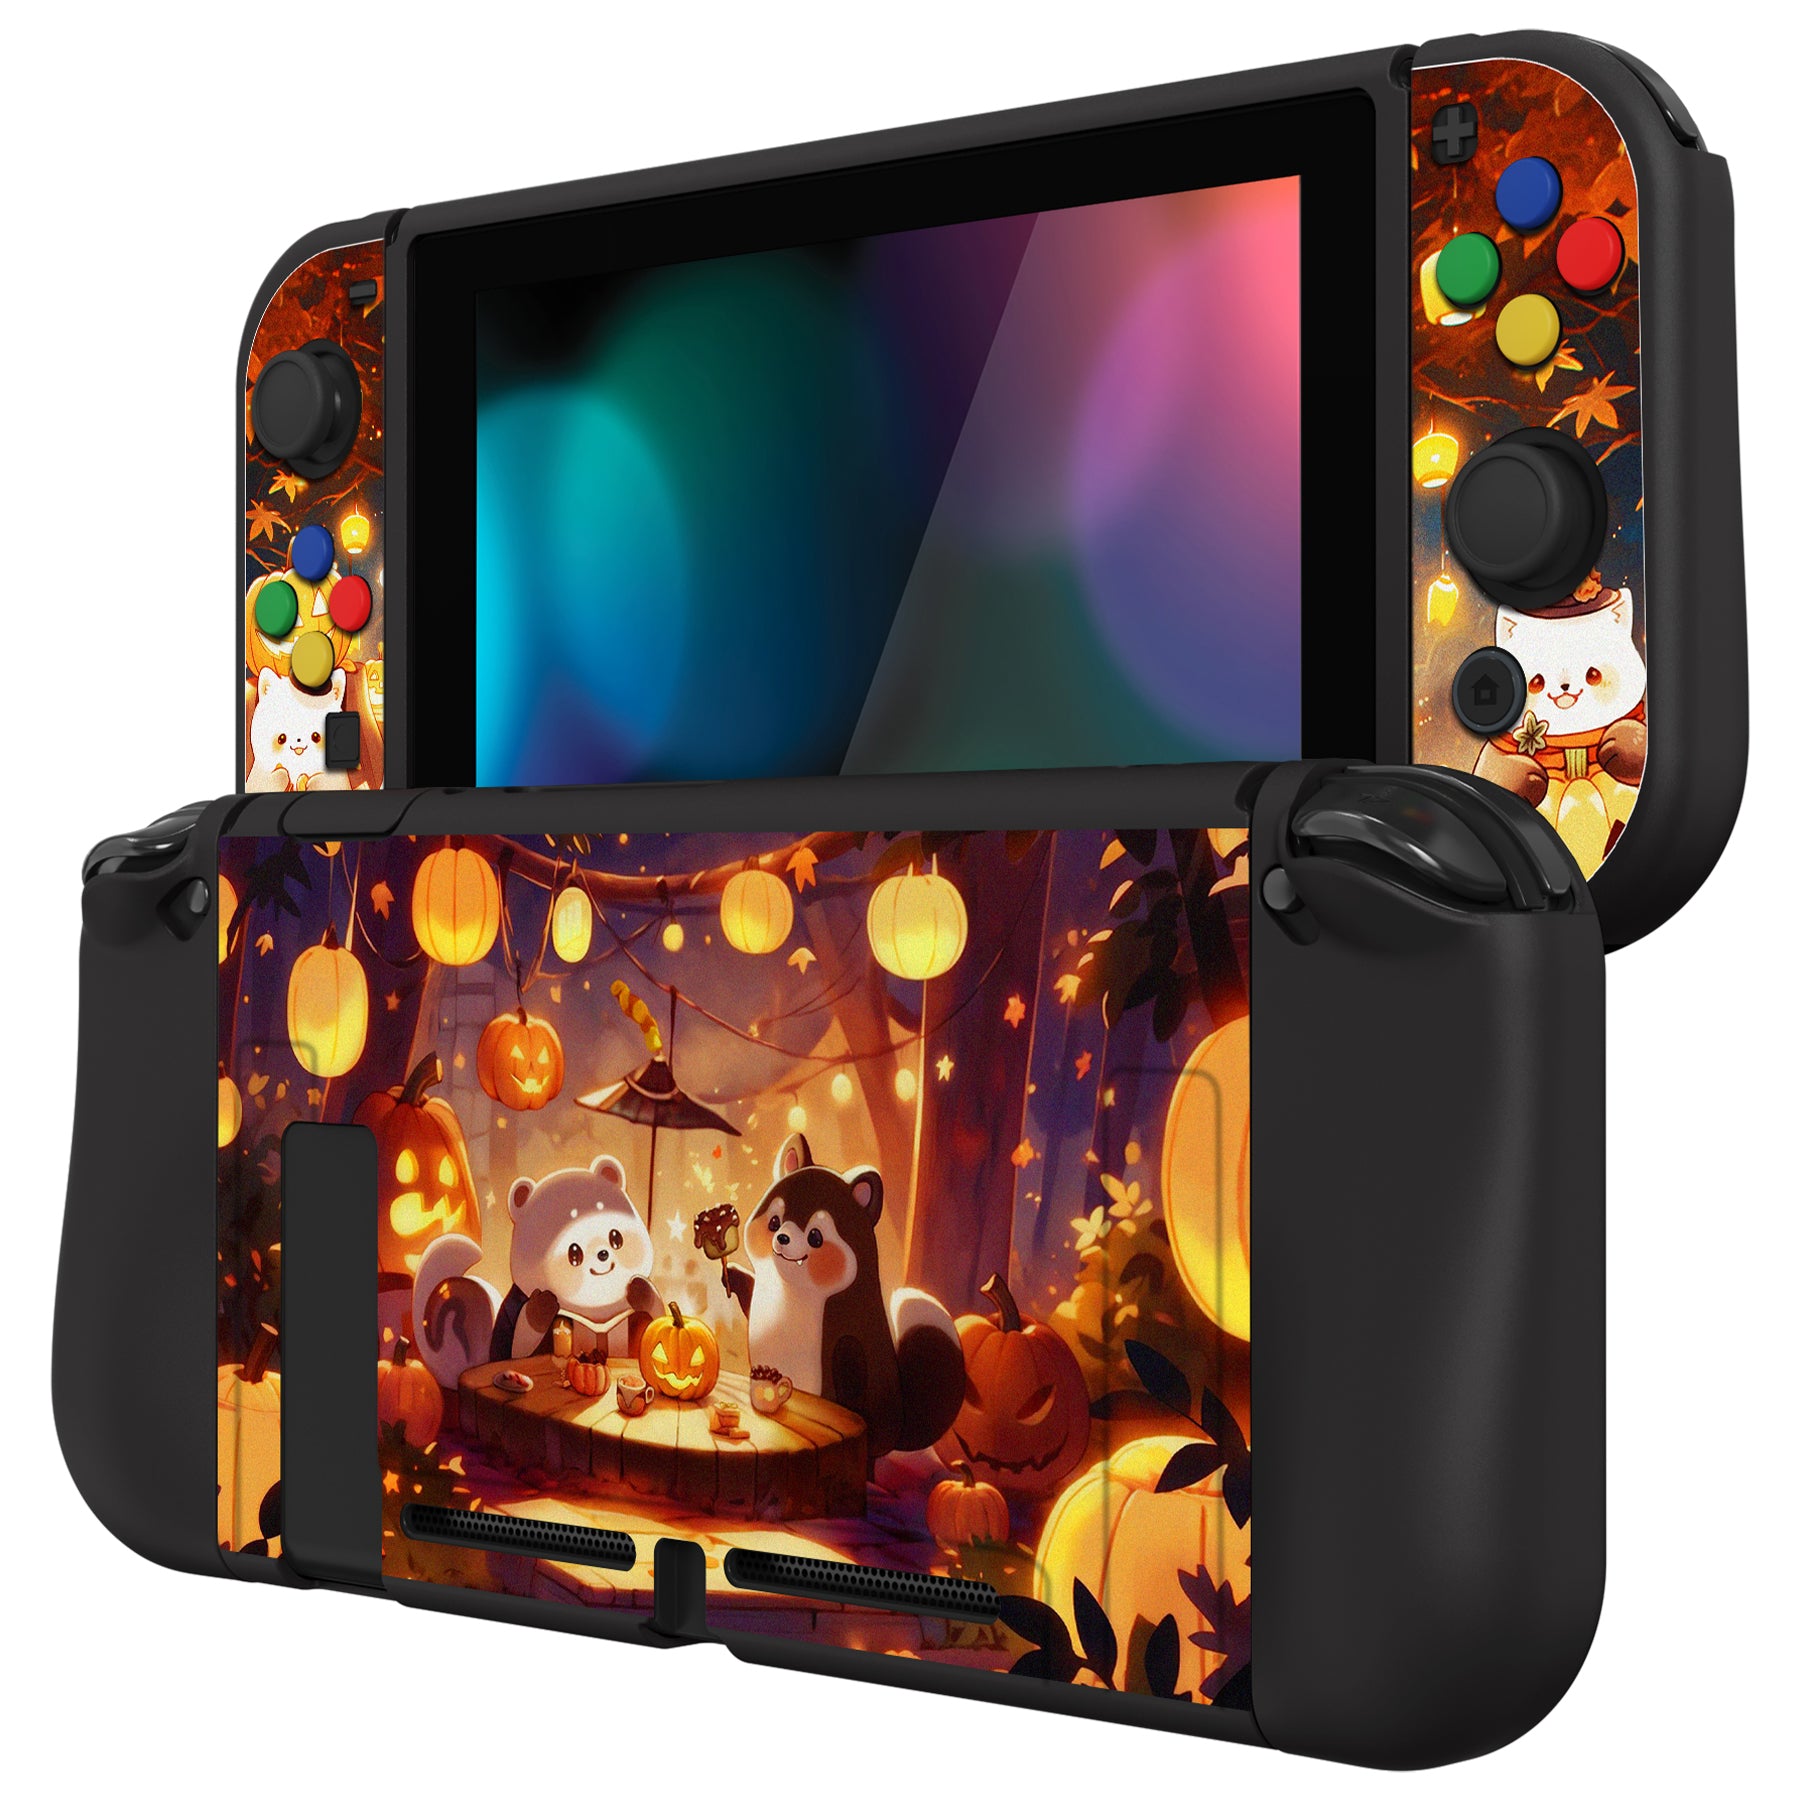 PlayVital ZealProtect Soft Protective Case for Nintendo Switch, Flexible Cover for Switch with Tempered Glass Screen Protector & Thumb Grips & ABXY Direction Button Caps - Halloween Pumpkin Fest - RNSYV6051 playvital